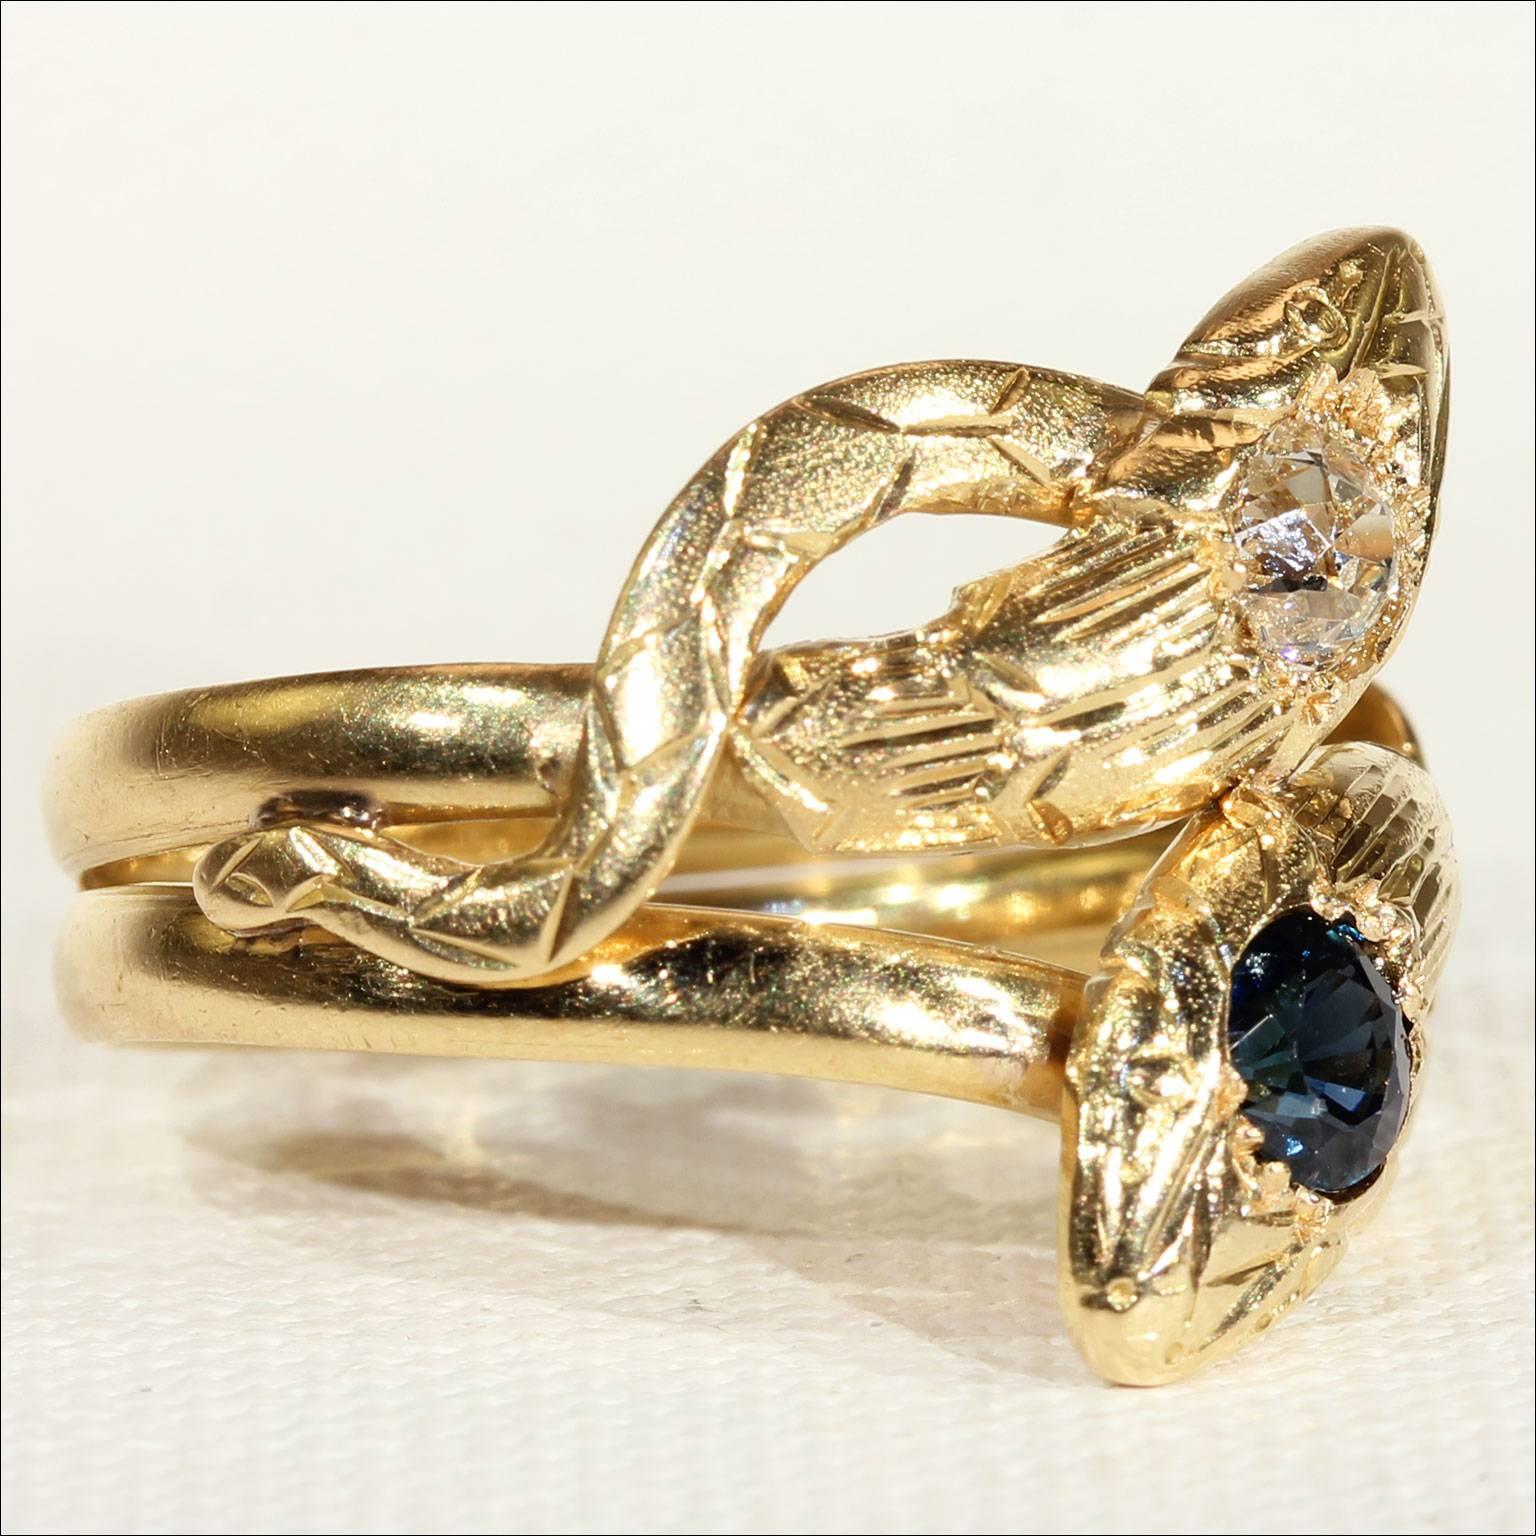 This fabulous antique dual snake ring was handcrafted in France around 1890. It was made in 18 karat gold and features a deep blue sapphire and a glittering white diamond. The round faceted sapphire, found on one of snake’s heads, measures 4.9 x